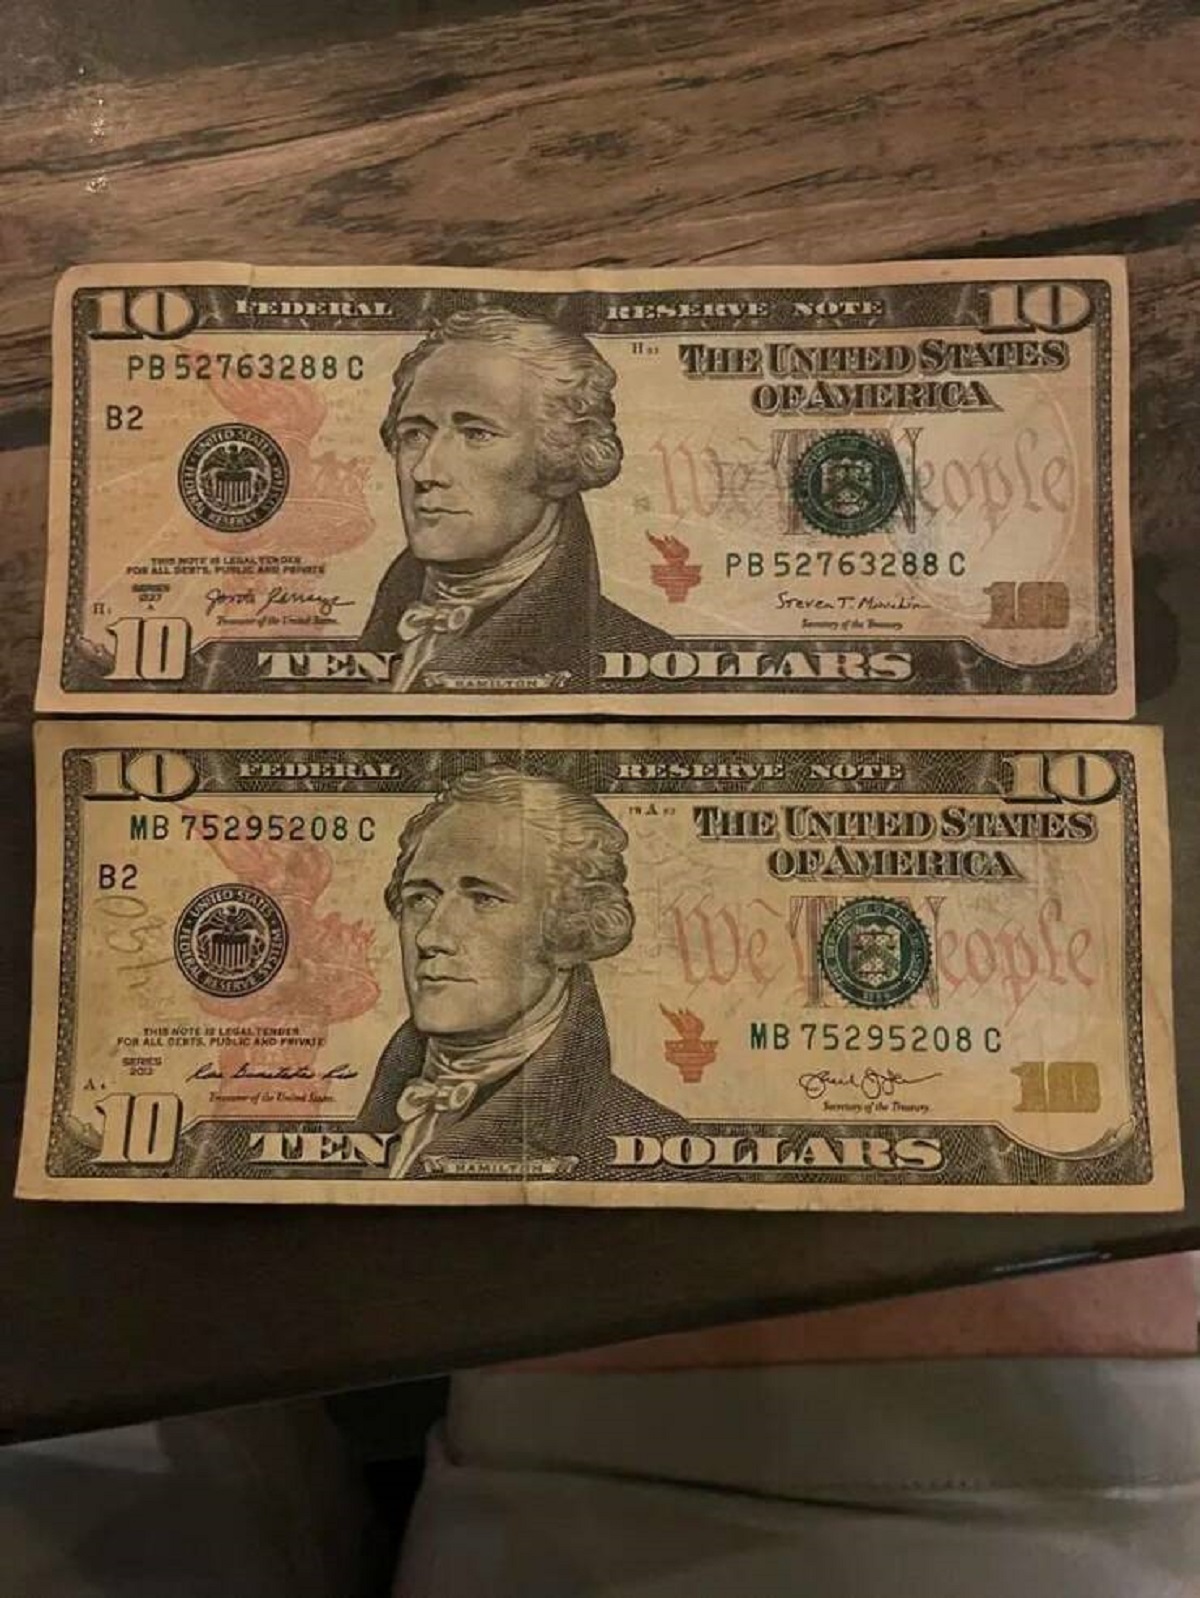 This is what a counterfeit $10 looks like compared to a real one: